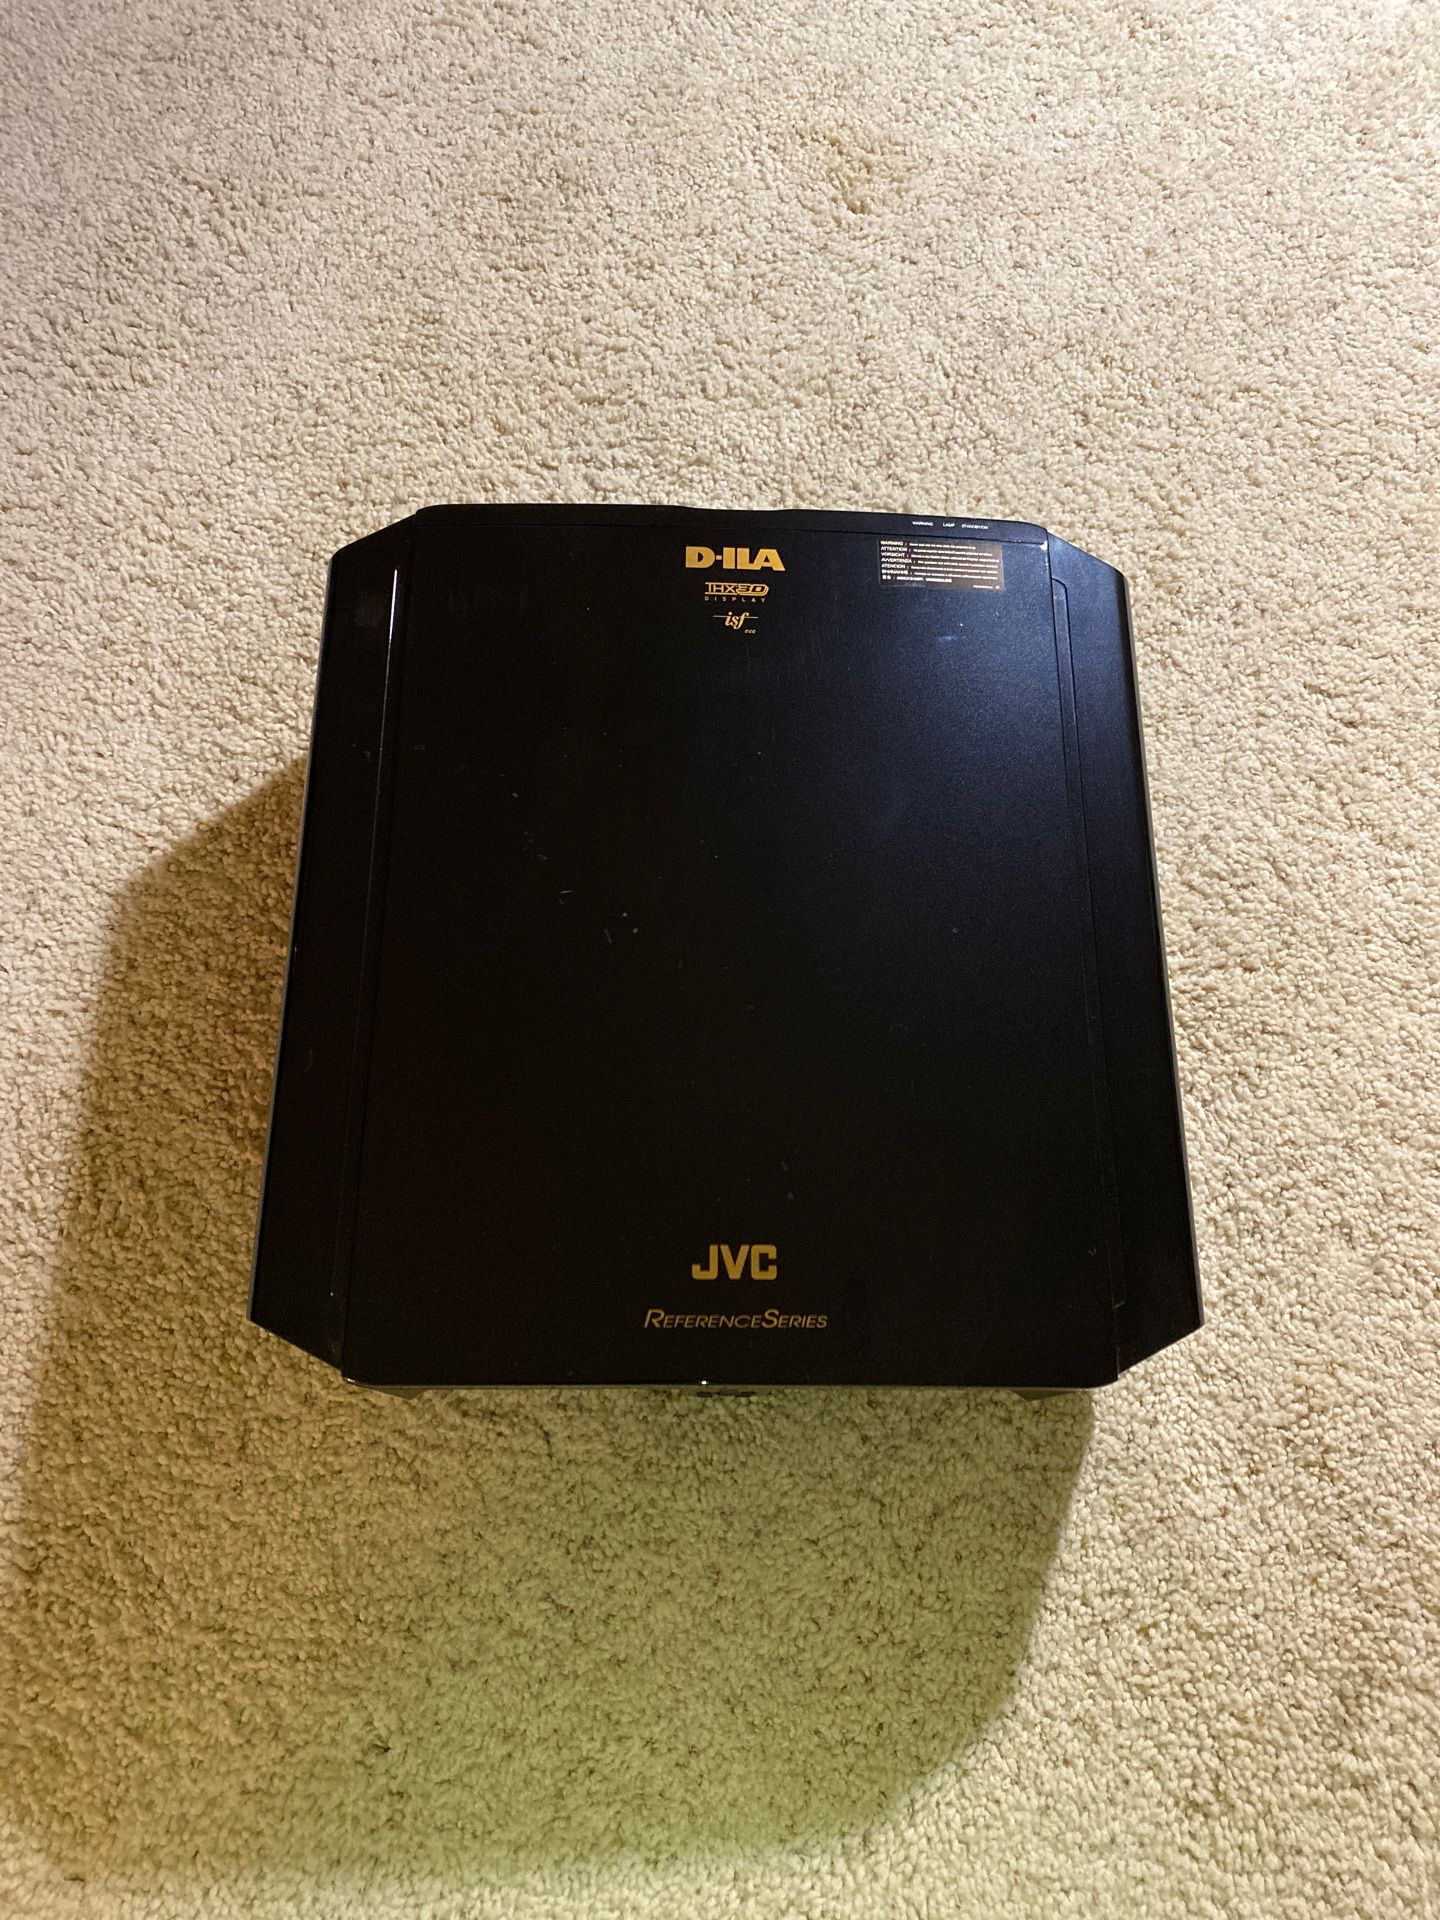 JVC Reference Series D-ILA Professional Projector